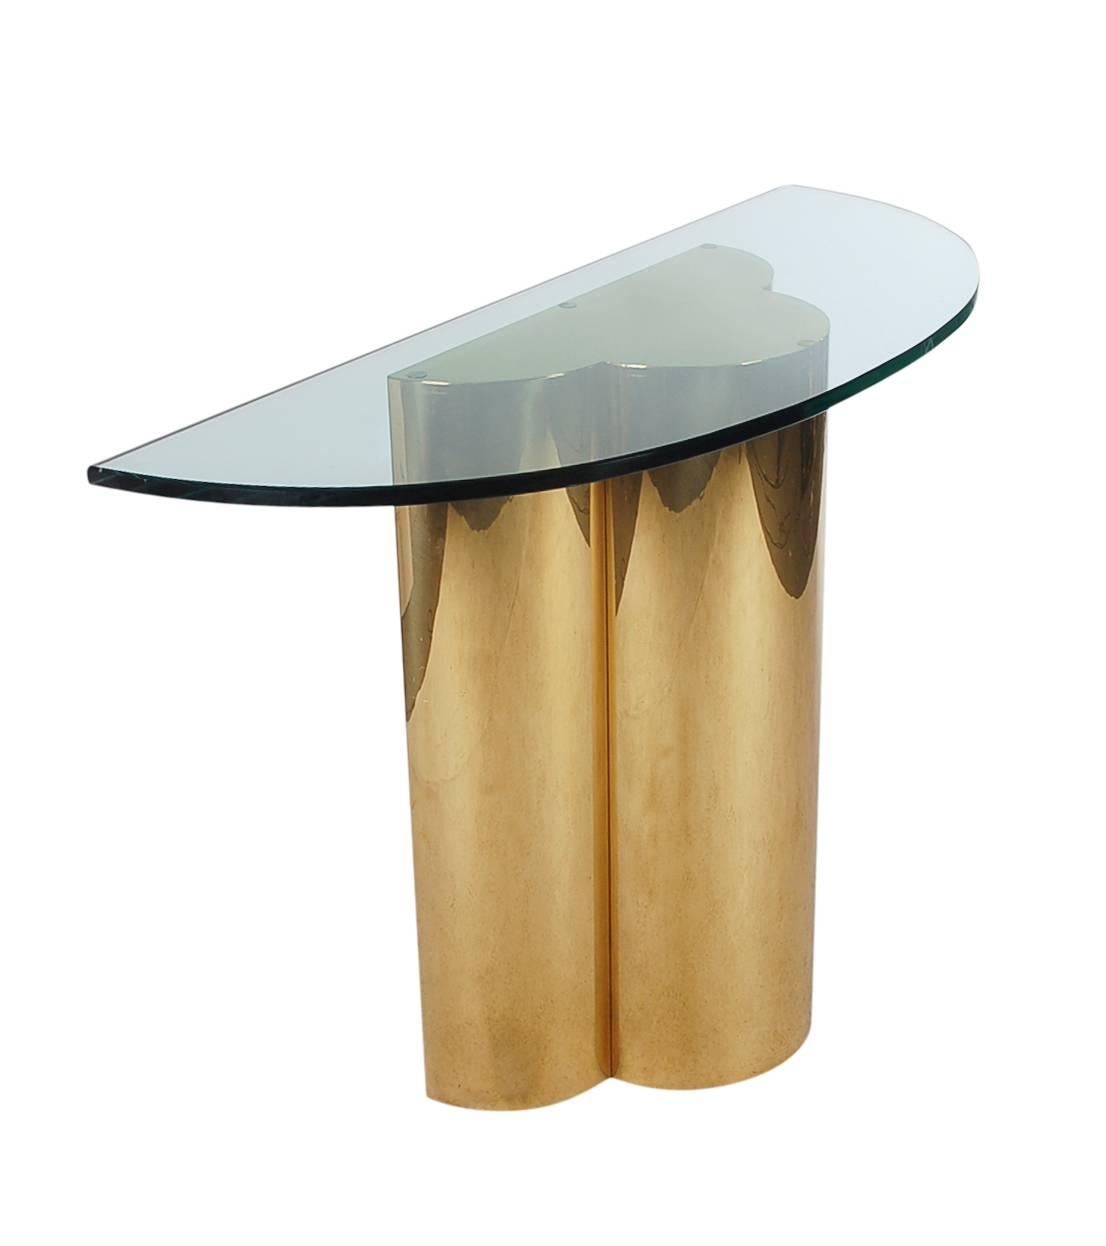 A beautiful trefoil form console table after C. Jere. It features a sculptural brass base, with thick demilune cut-glass.